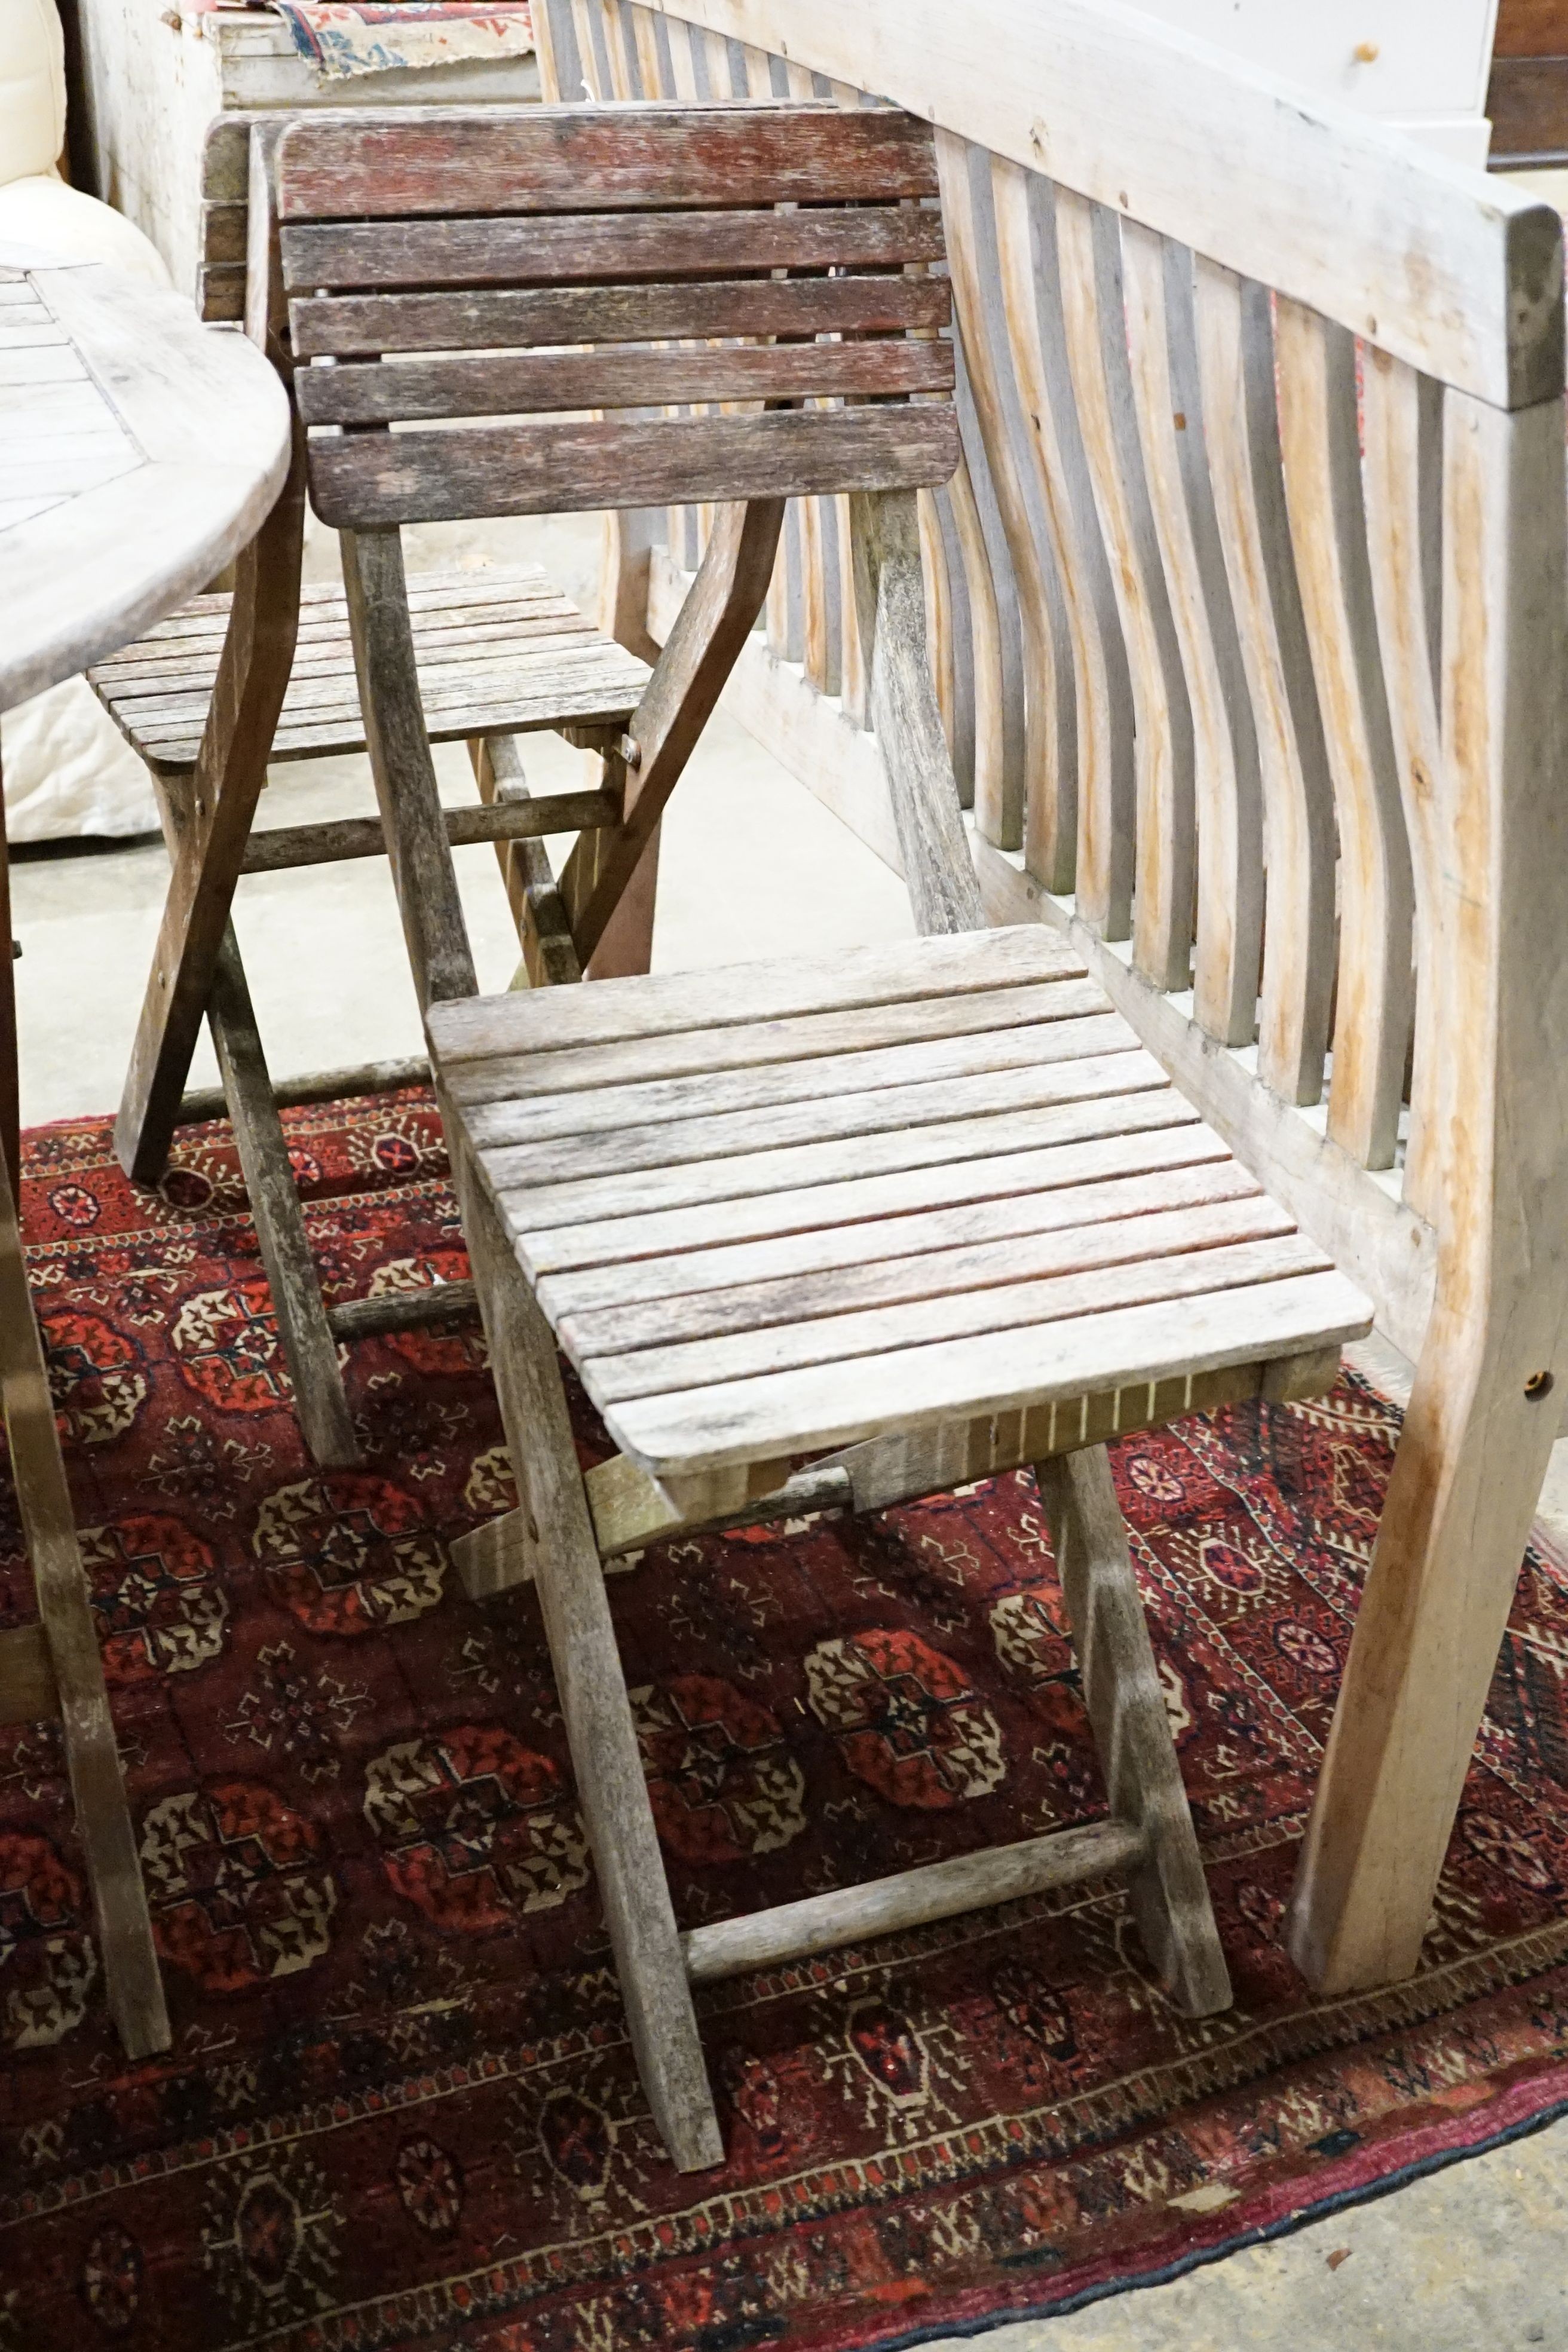 A weathered teak circular folding garden table and five folding chairs